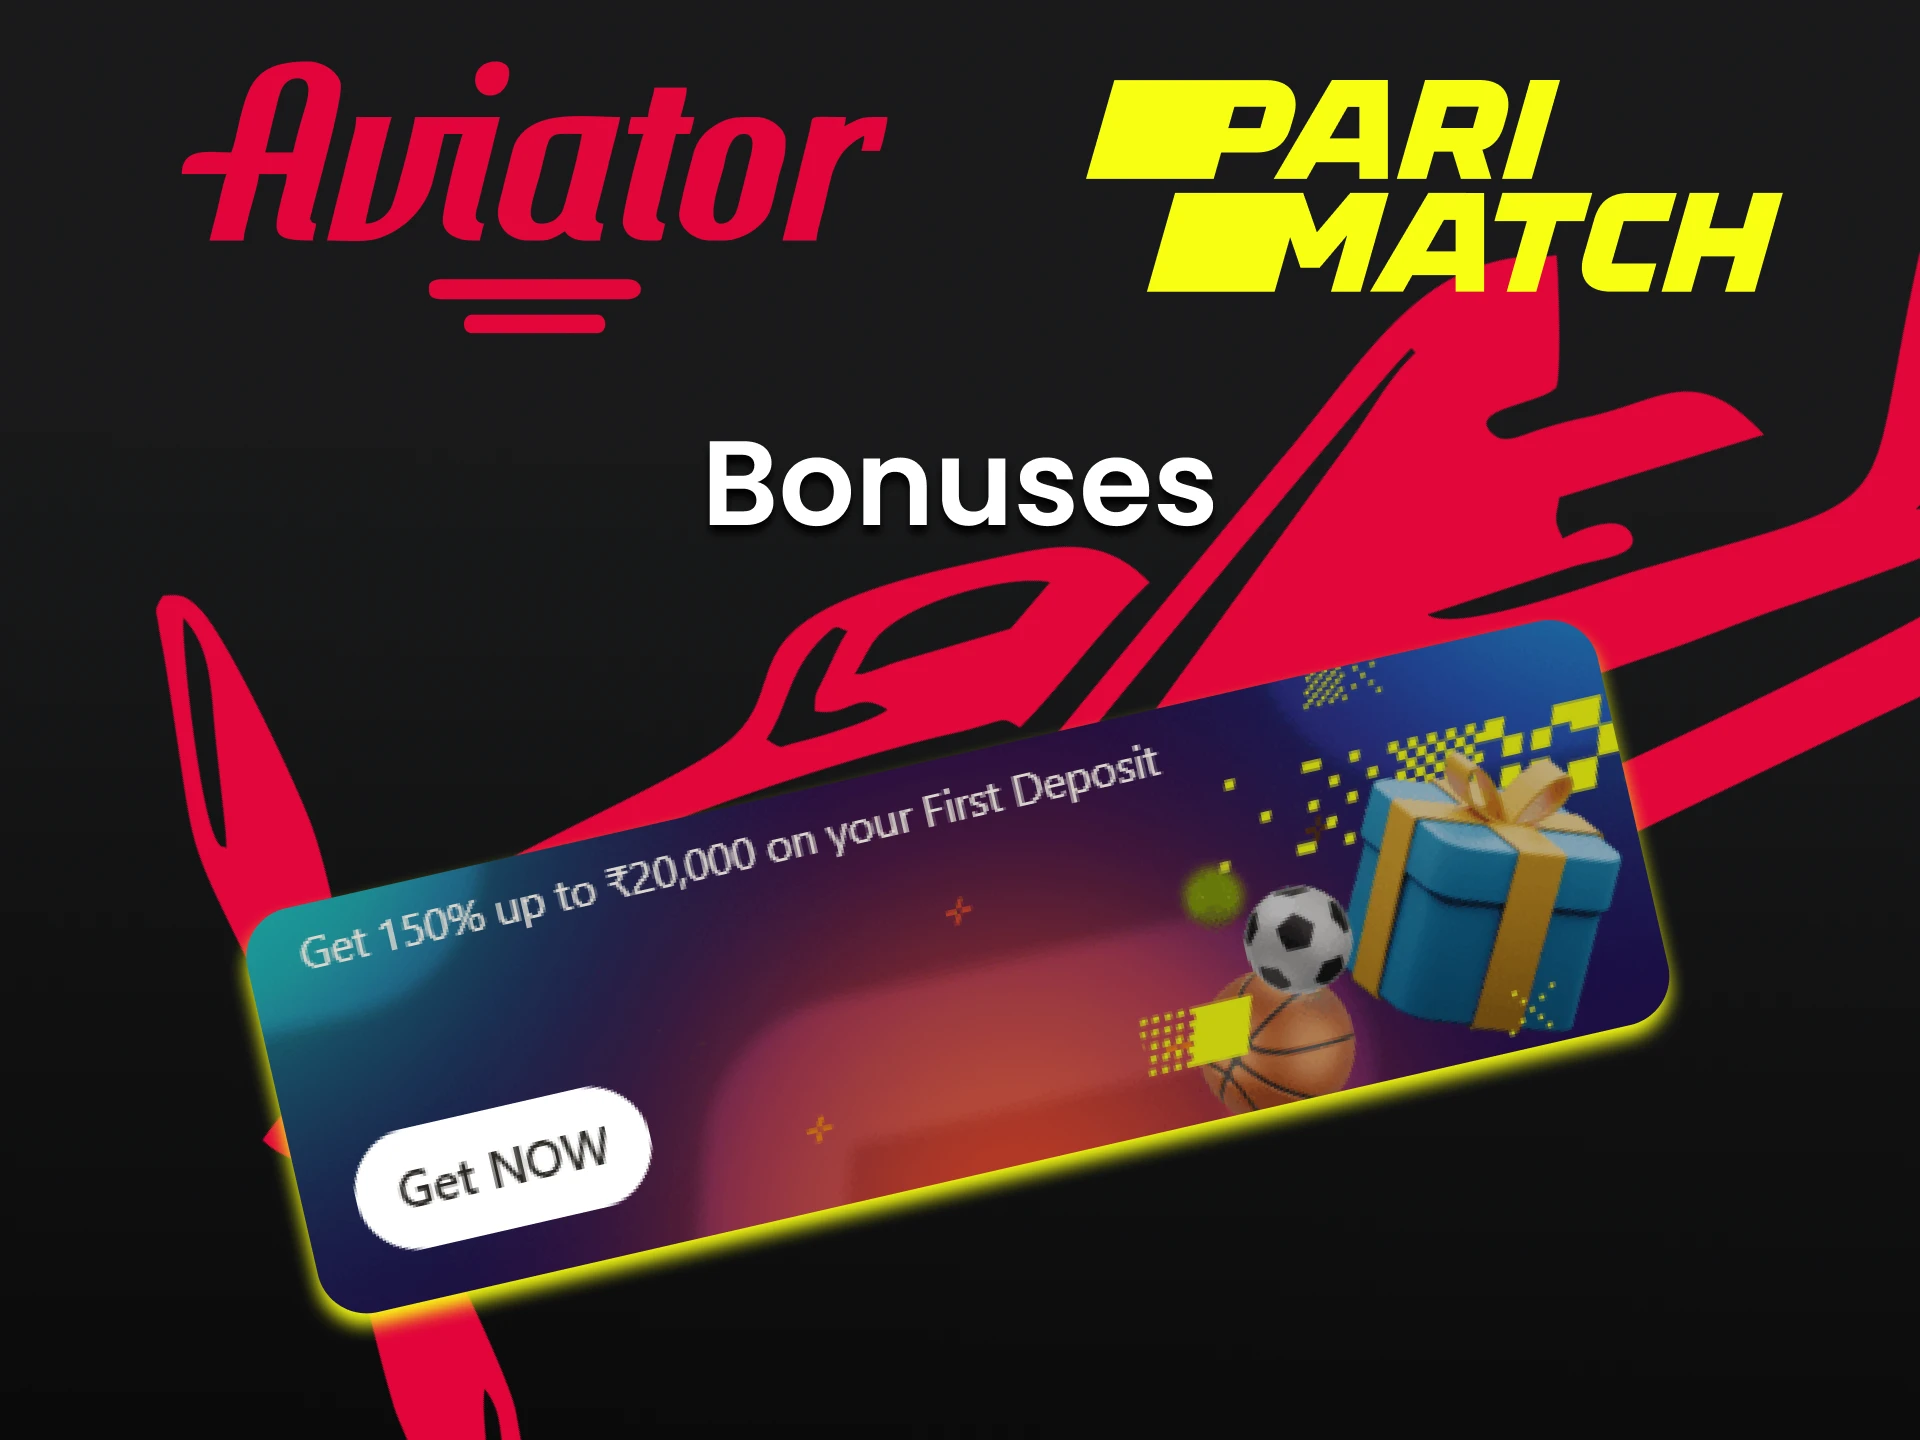 Get various bonuses for playing Aviator from Parimatch.